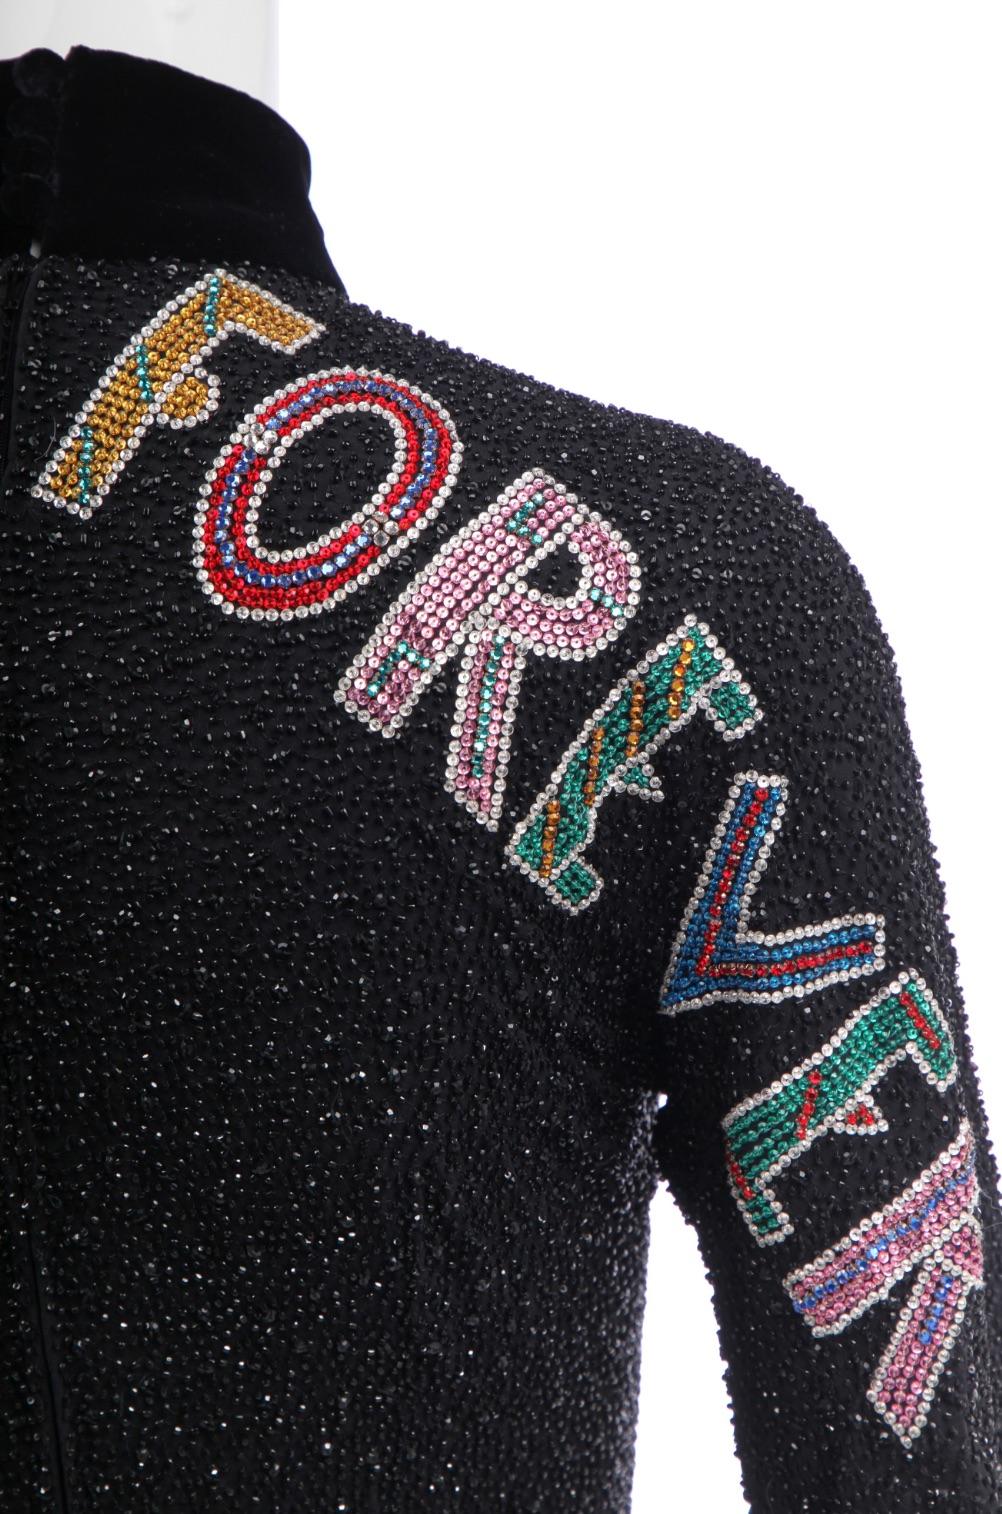 Gianni Versace couture beaded 'Java Forever' dress, Autumn-Winter 1989-90 For Sale 4